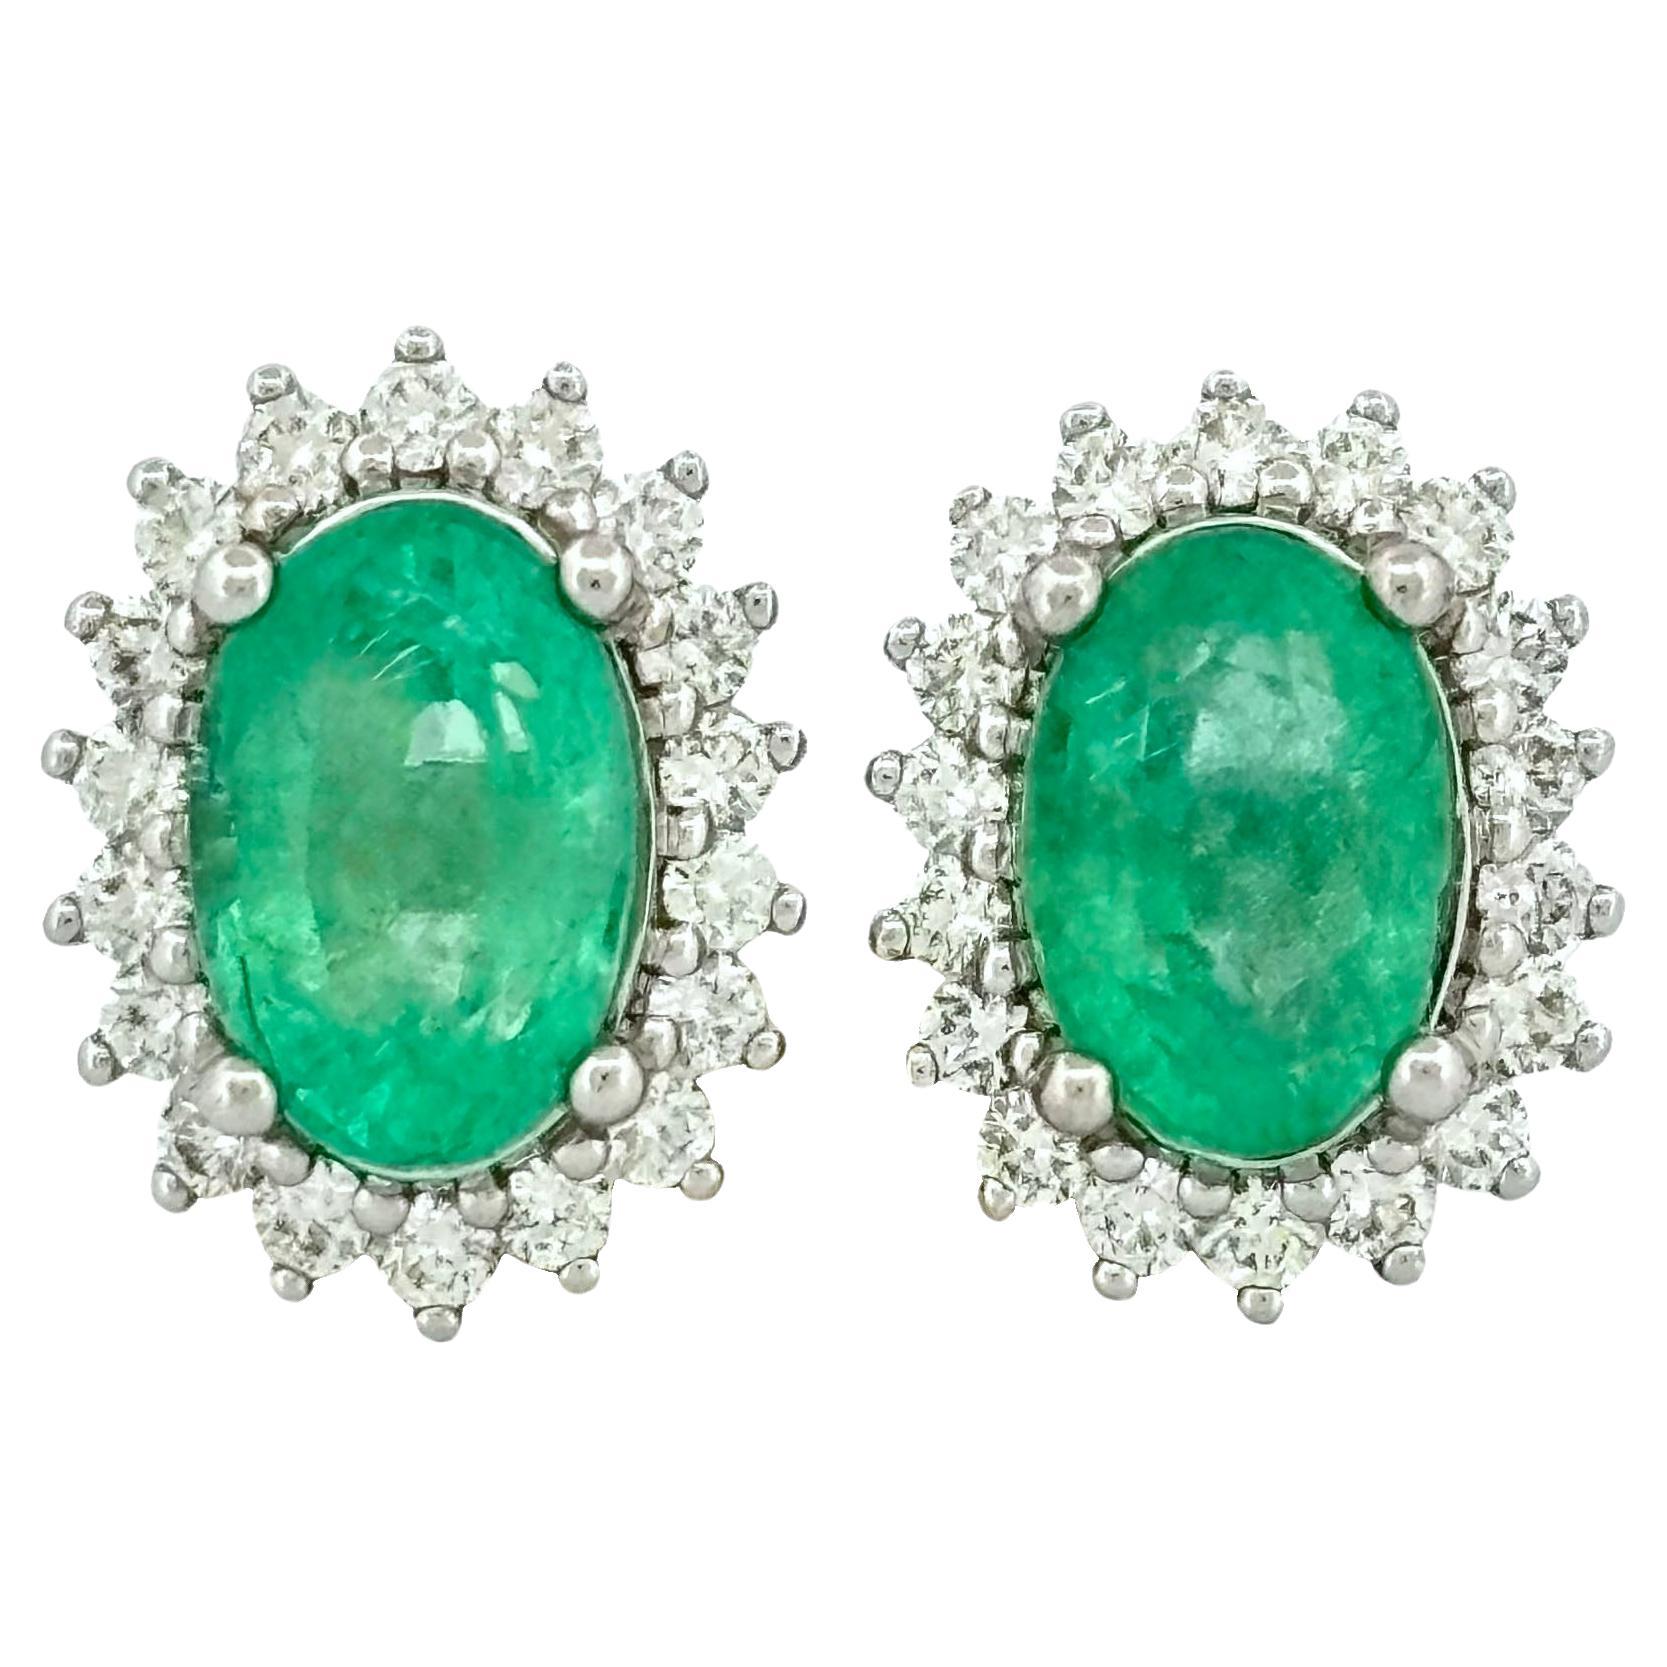  2.96 Carat Emerald Stud Earrings with Natural Diamonds in 18K White Gold  For Sale